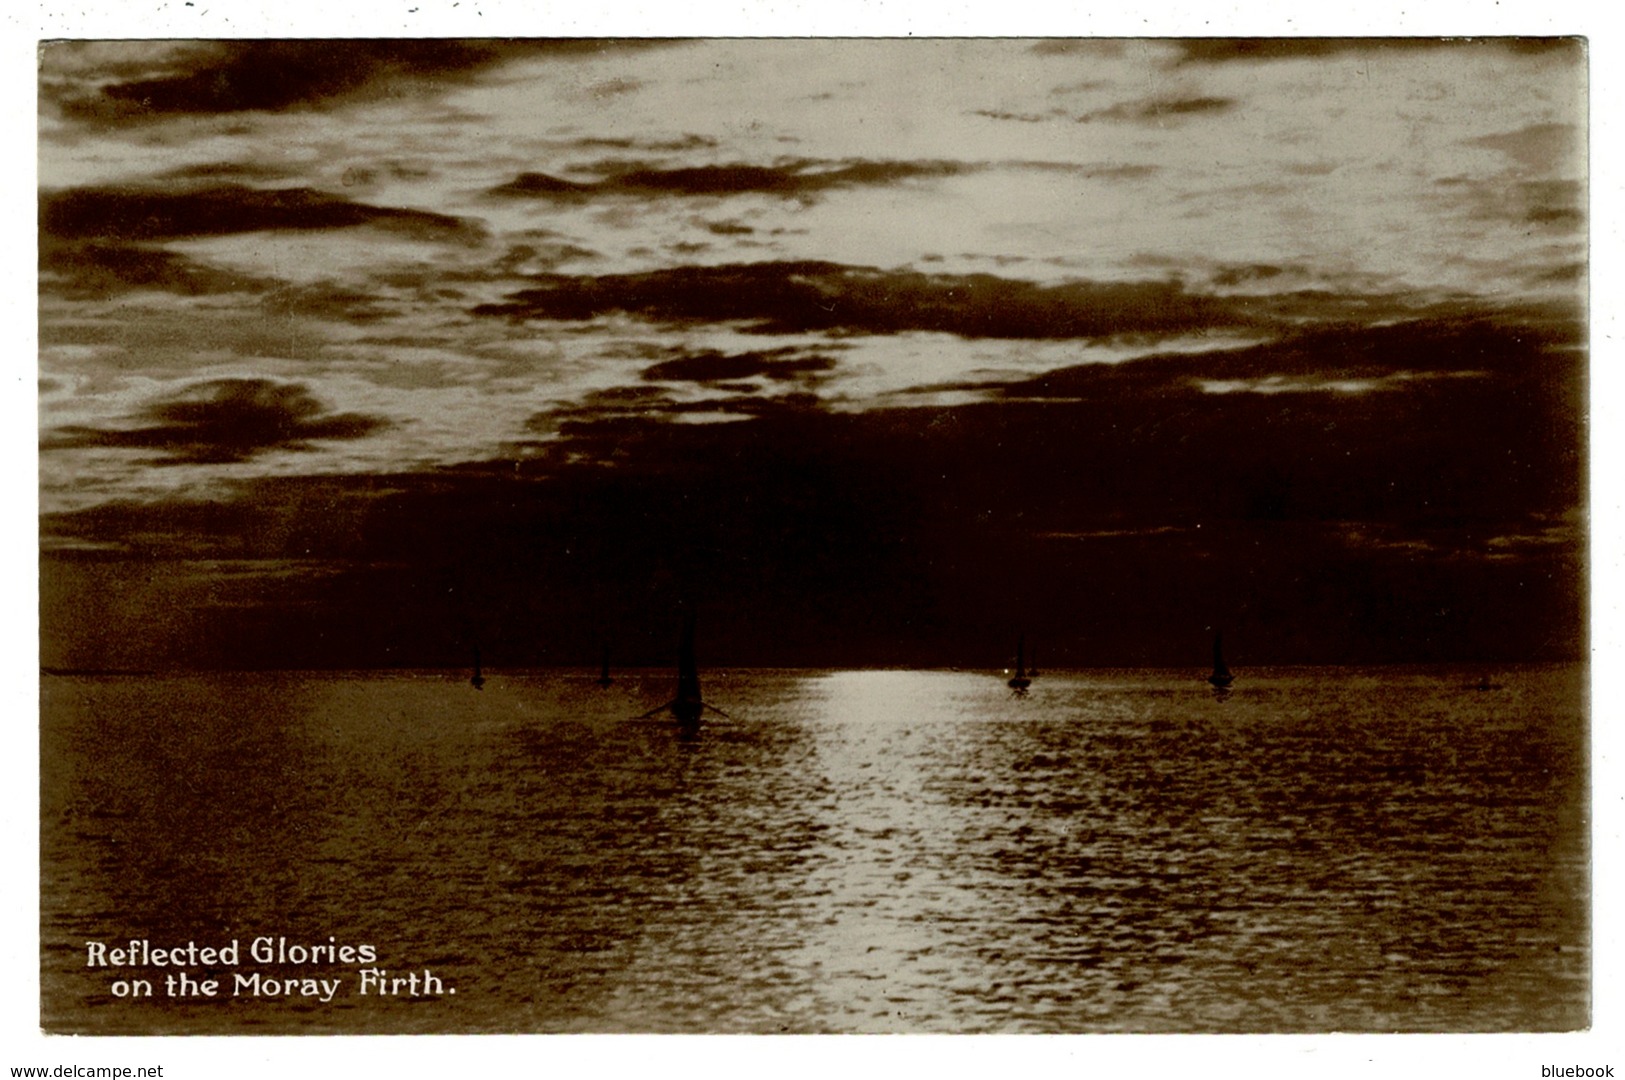 Ref 1357 - Early Real Photo Postcard - Reflected Glories & Boats On The Moray Firth - Moray